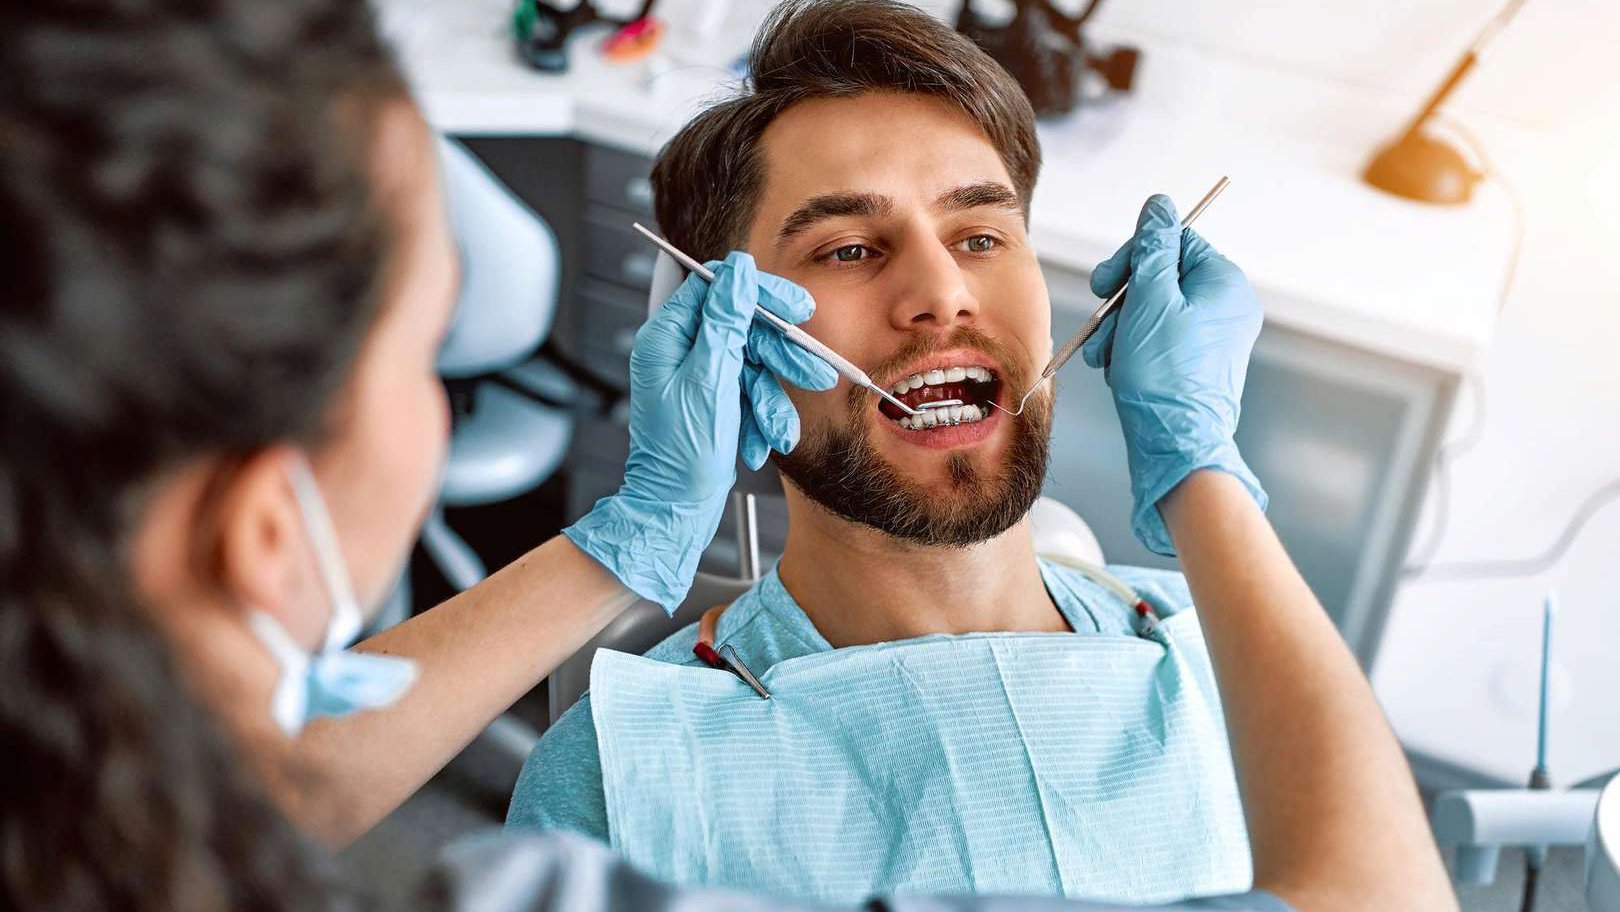 Shining smiles are made here: TOP 6 dental clinics in Kutaisi